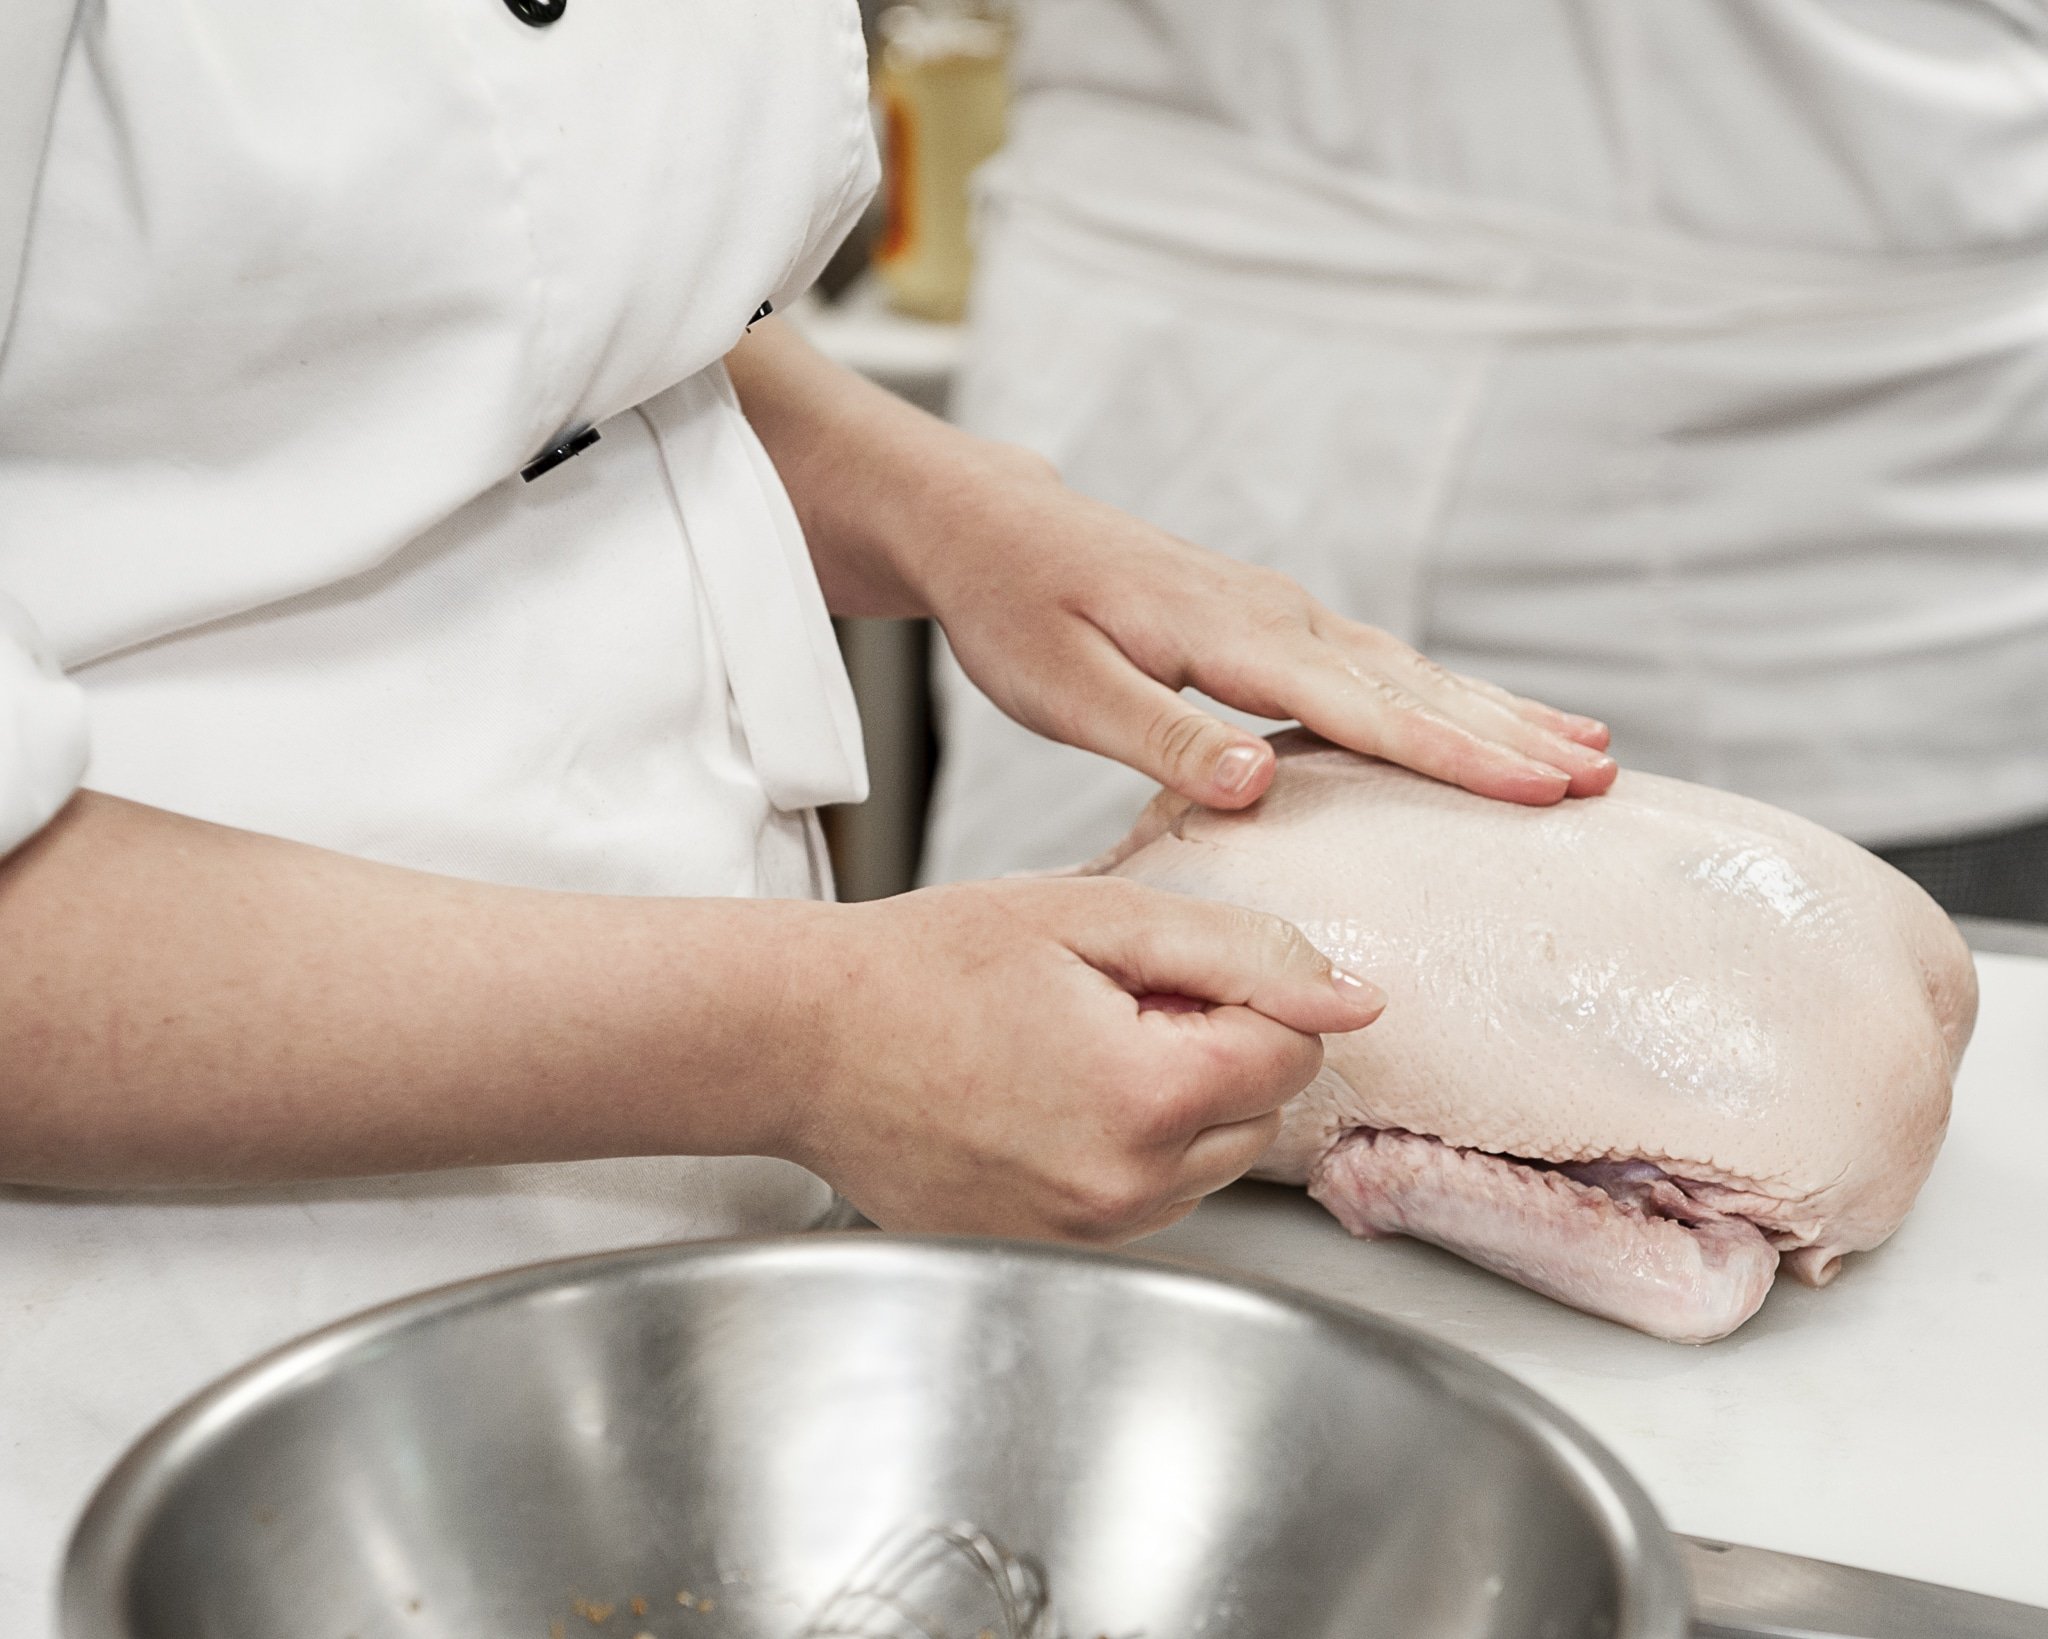 A culinary student begins to prepare a raw duck.